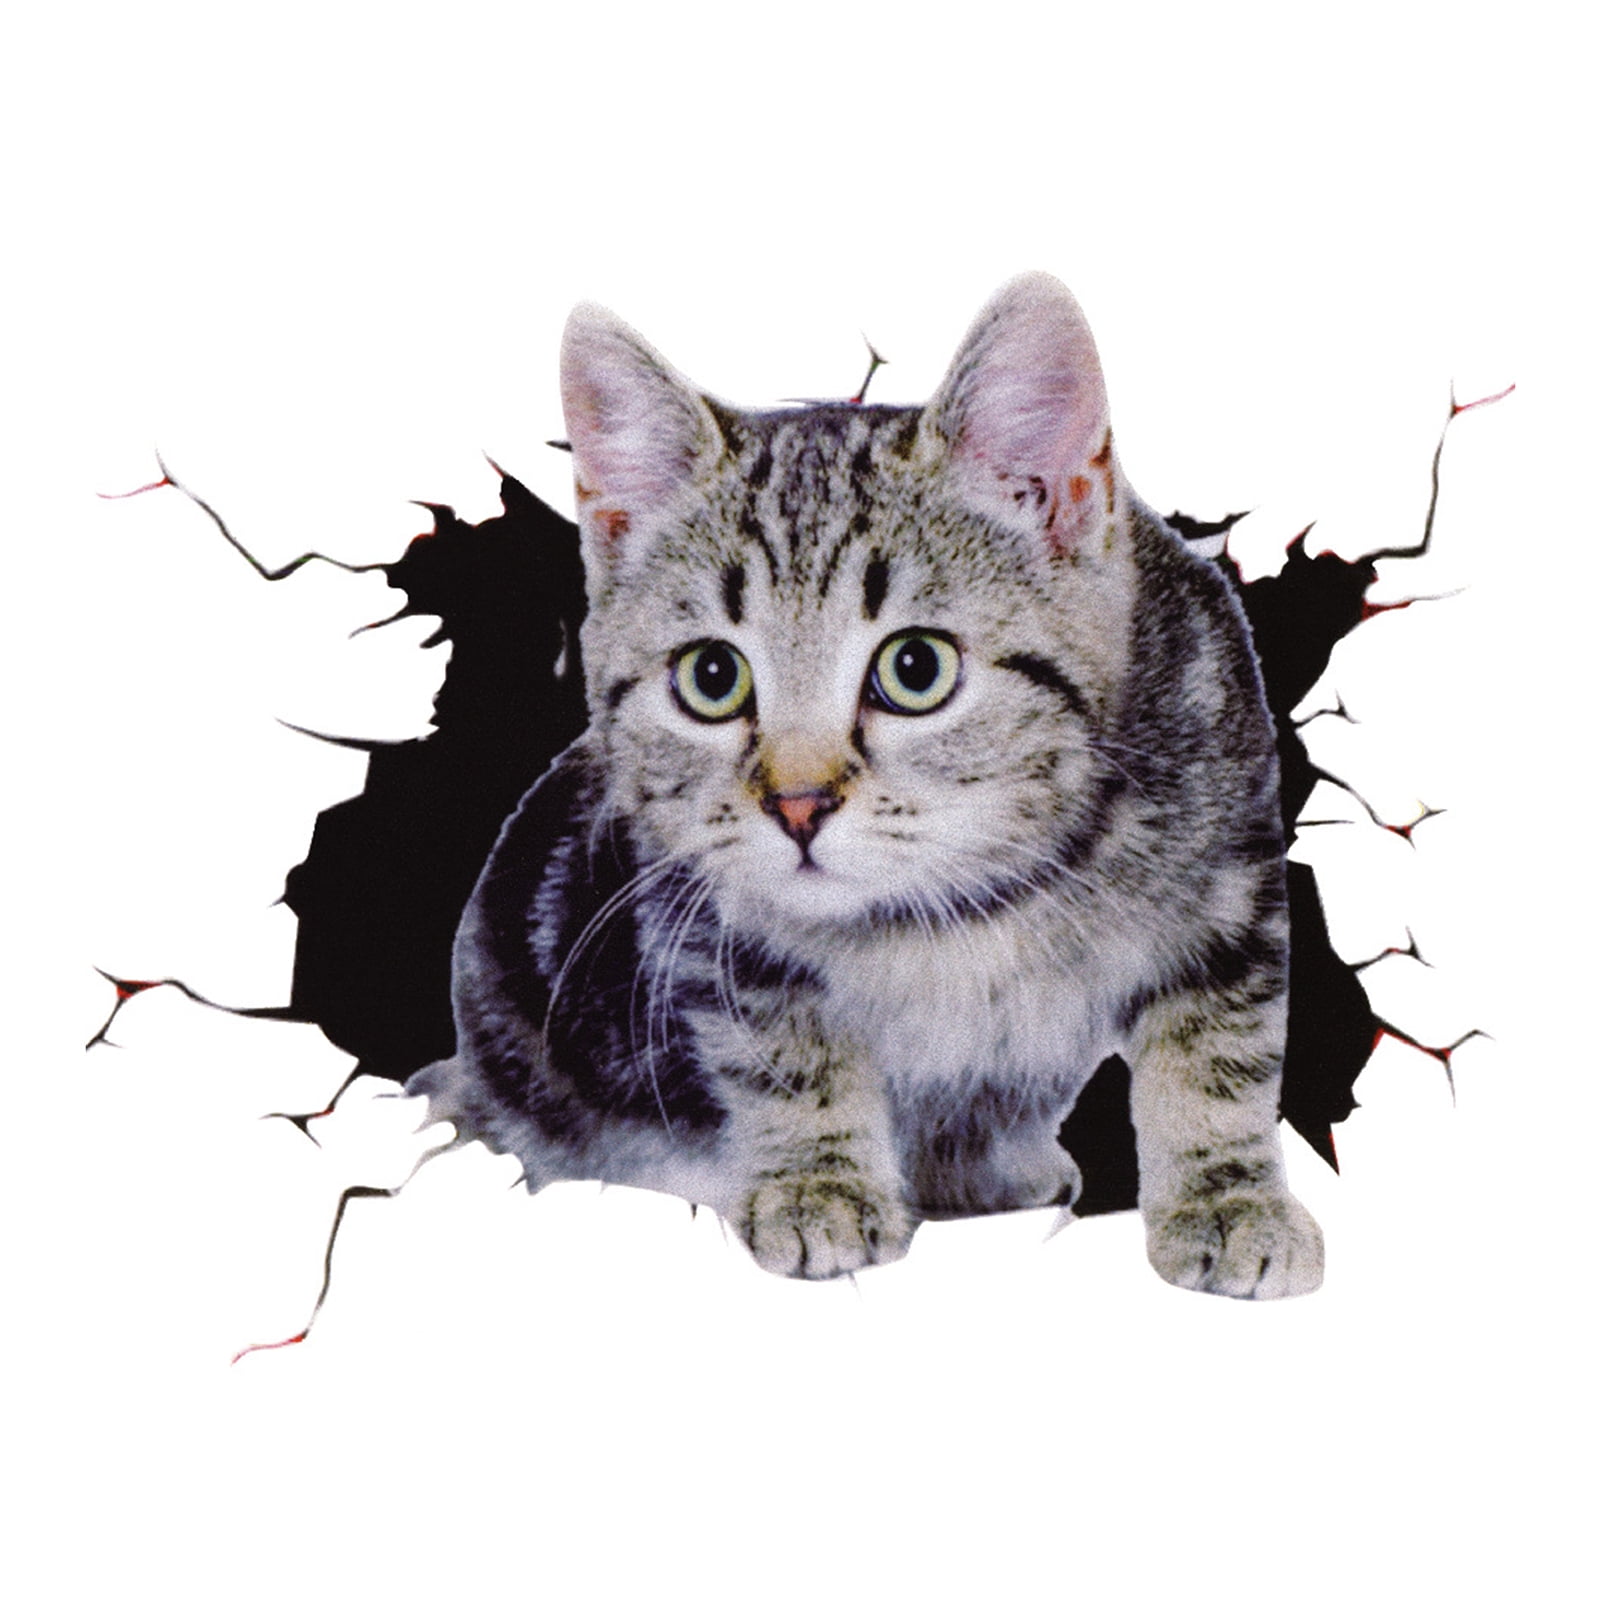 Cat Sticker Self-adhesive Realistic Wall Decal for Decor - Walmart.com